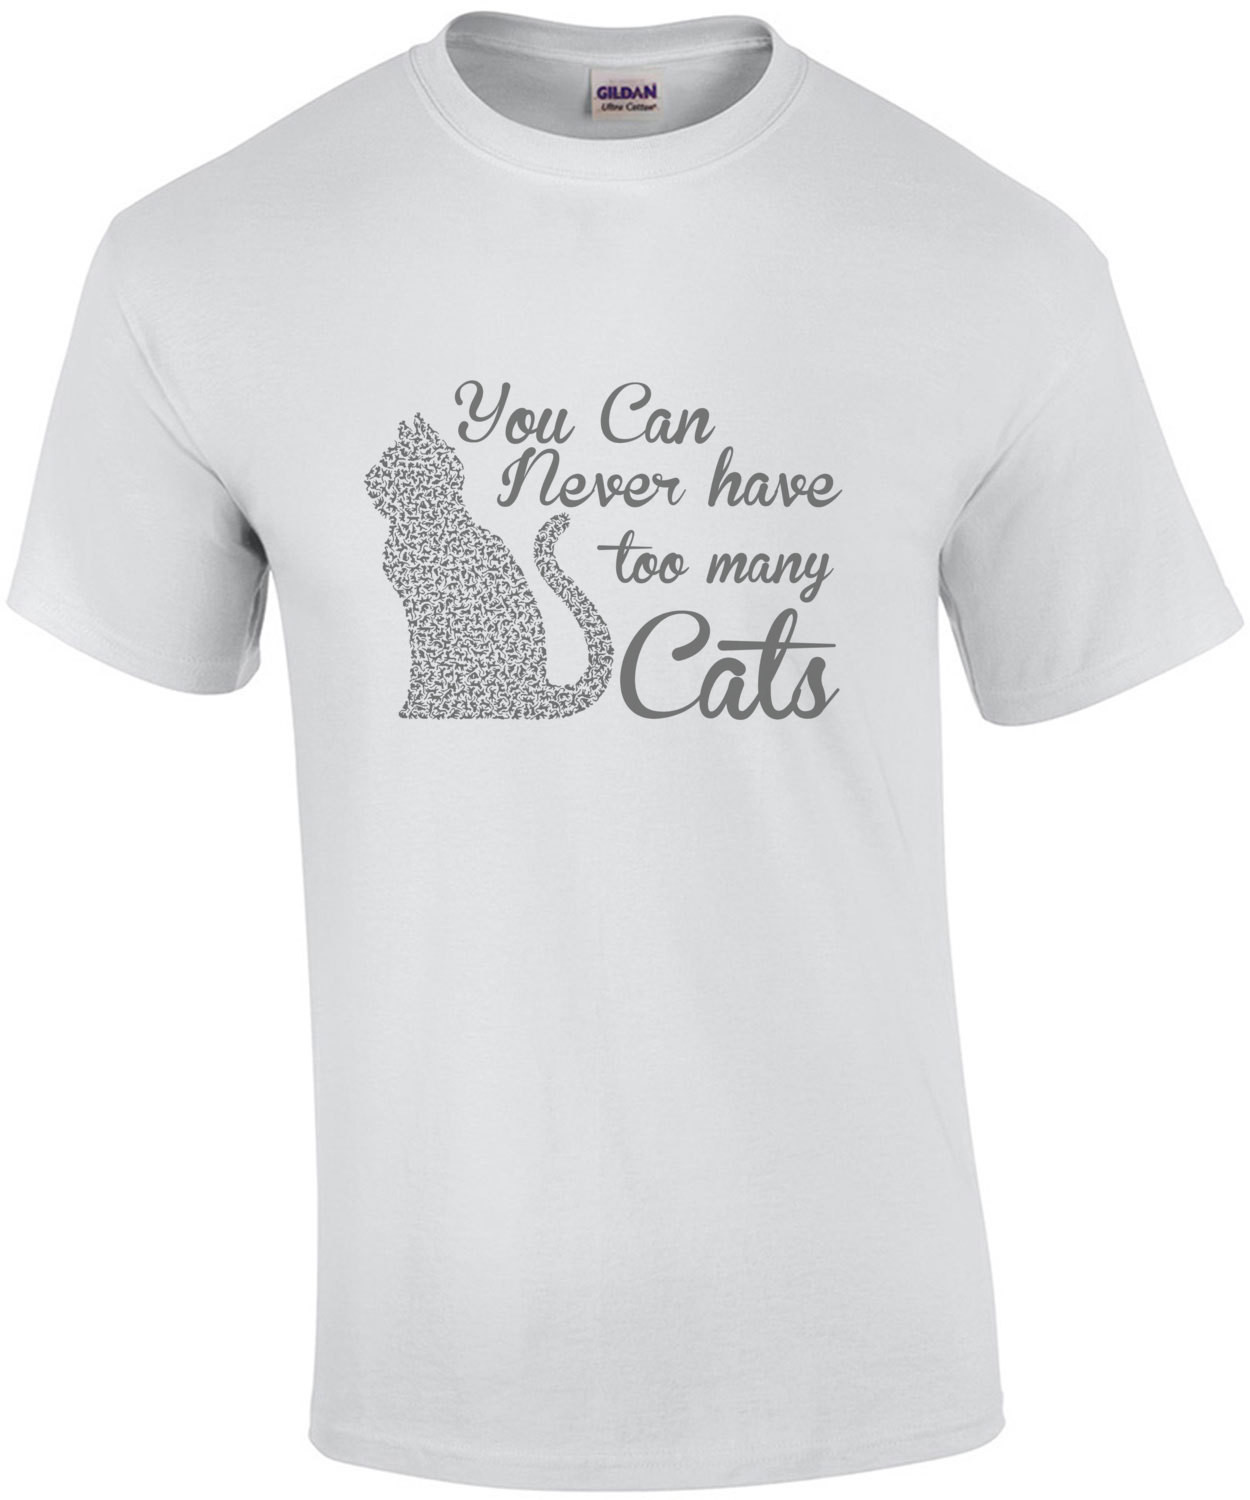 You Can Never Have Too Many Cats T-Shirt